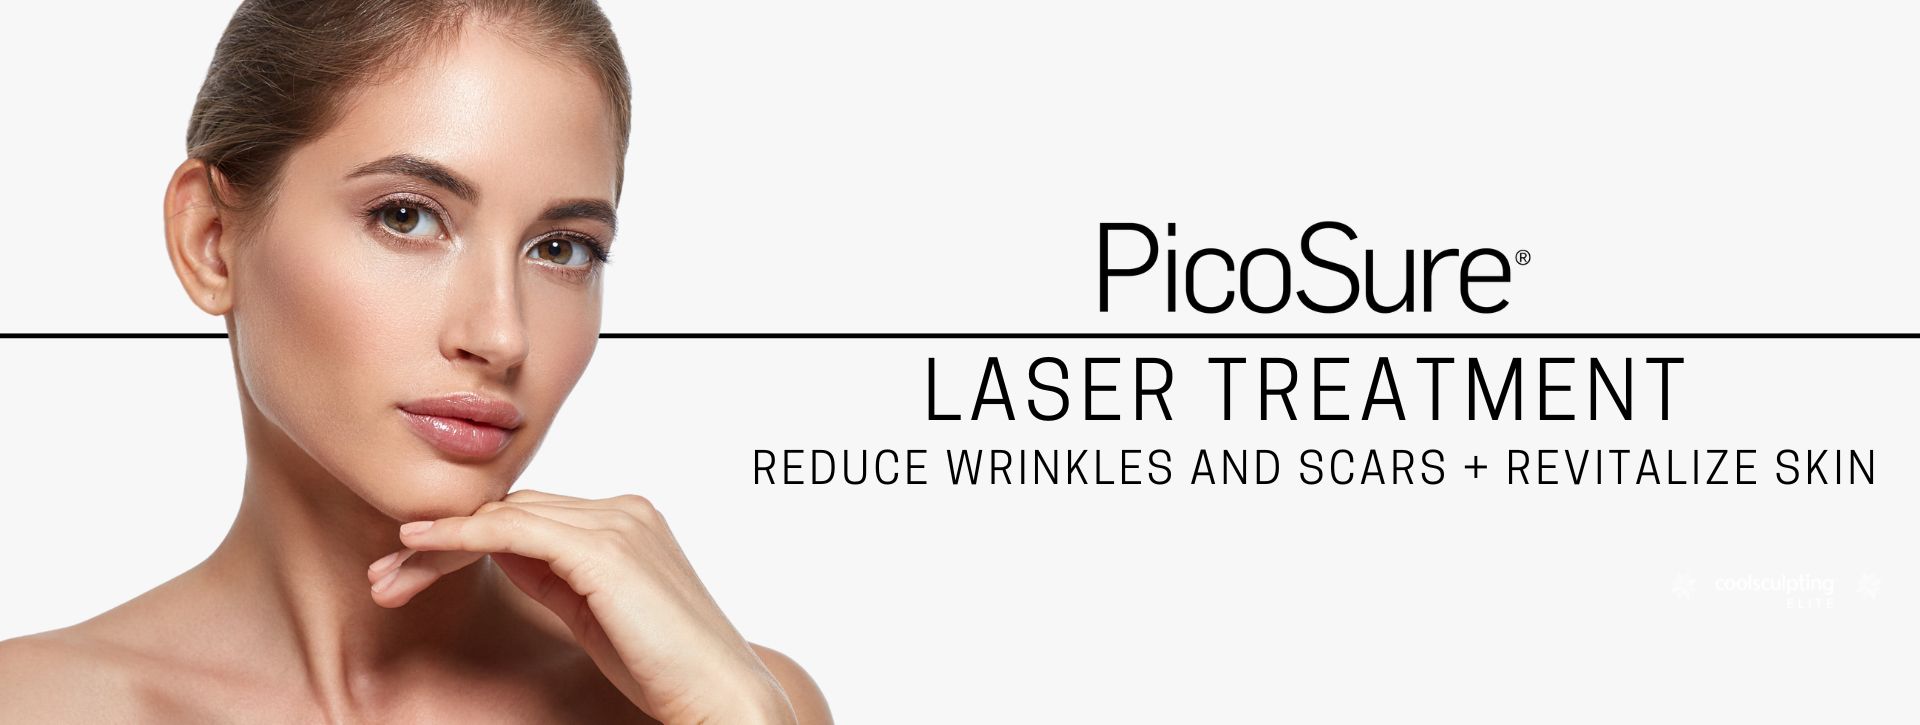 An image showing a woman with beautiful and flawless face from PicoSure in Westlake, OH.